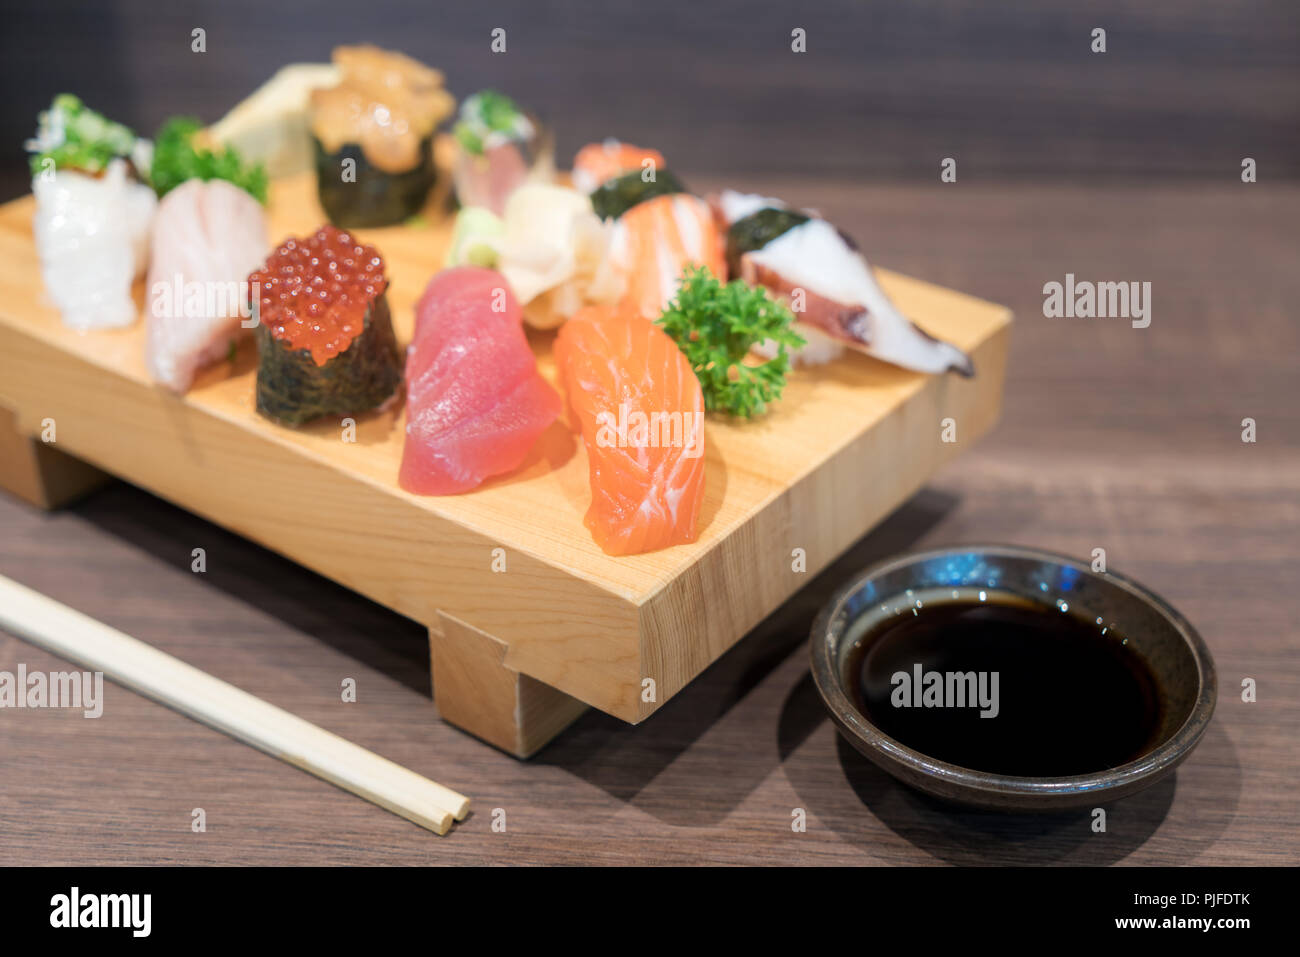 Close-up sushi and sashimi mixed on wooden plate on black wooden table. Japanese food. Stock Photo